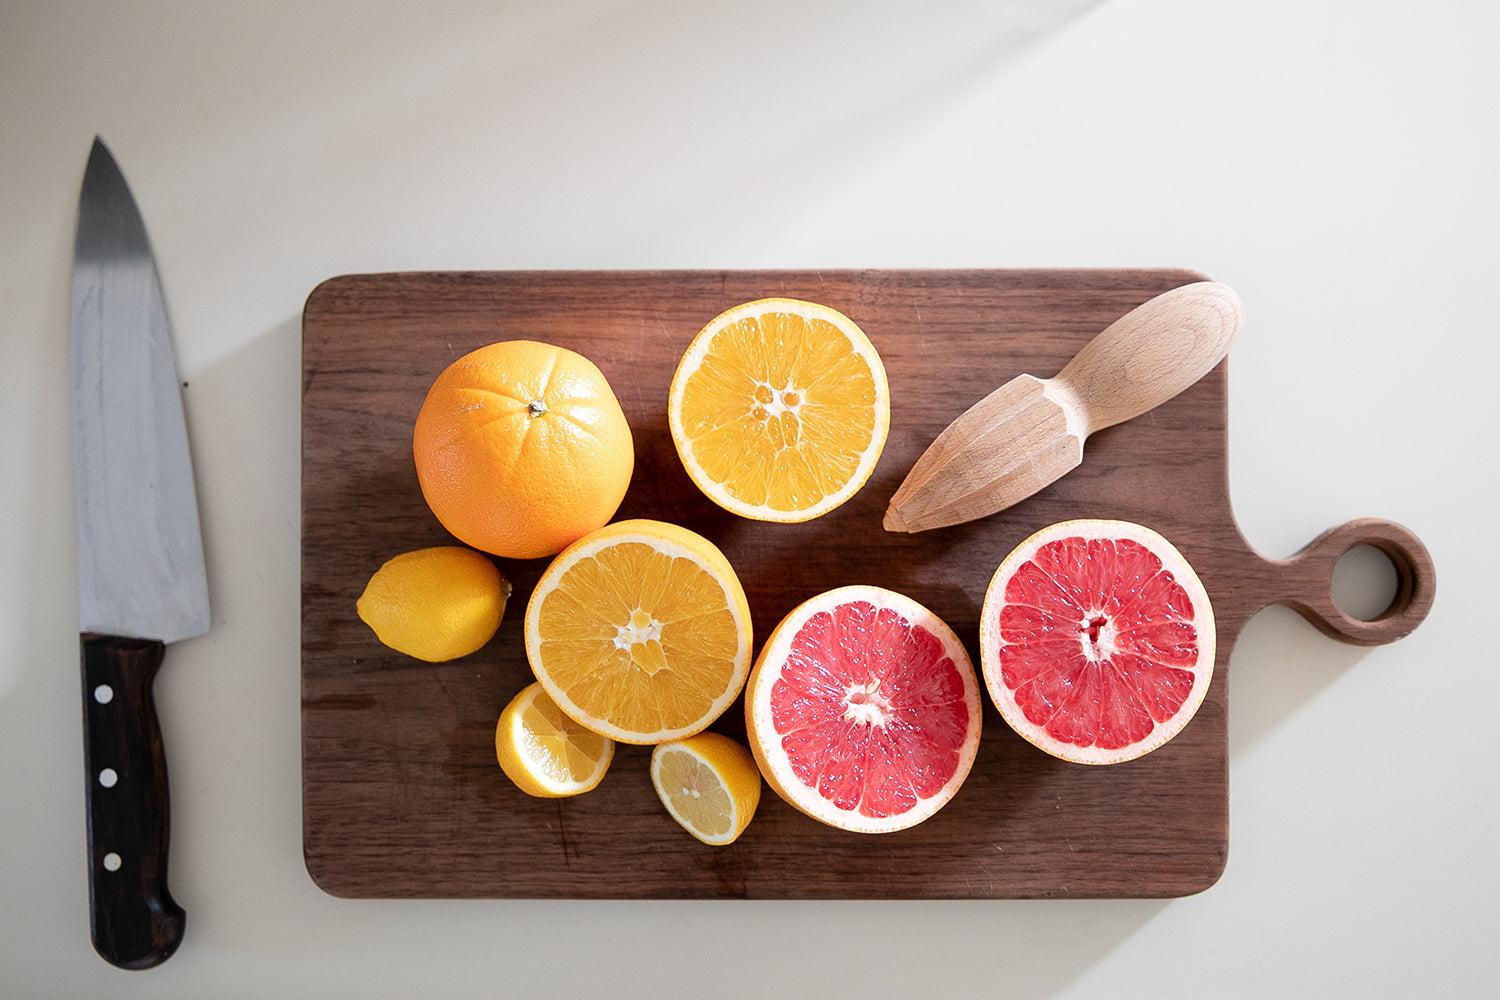 cut citrus and a juicer tool on a cutting board next to a knife